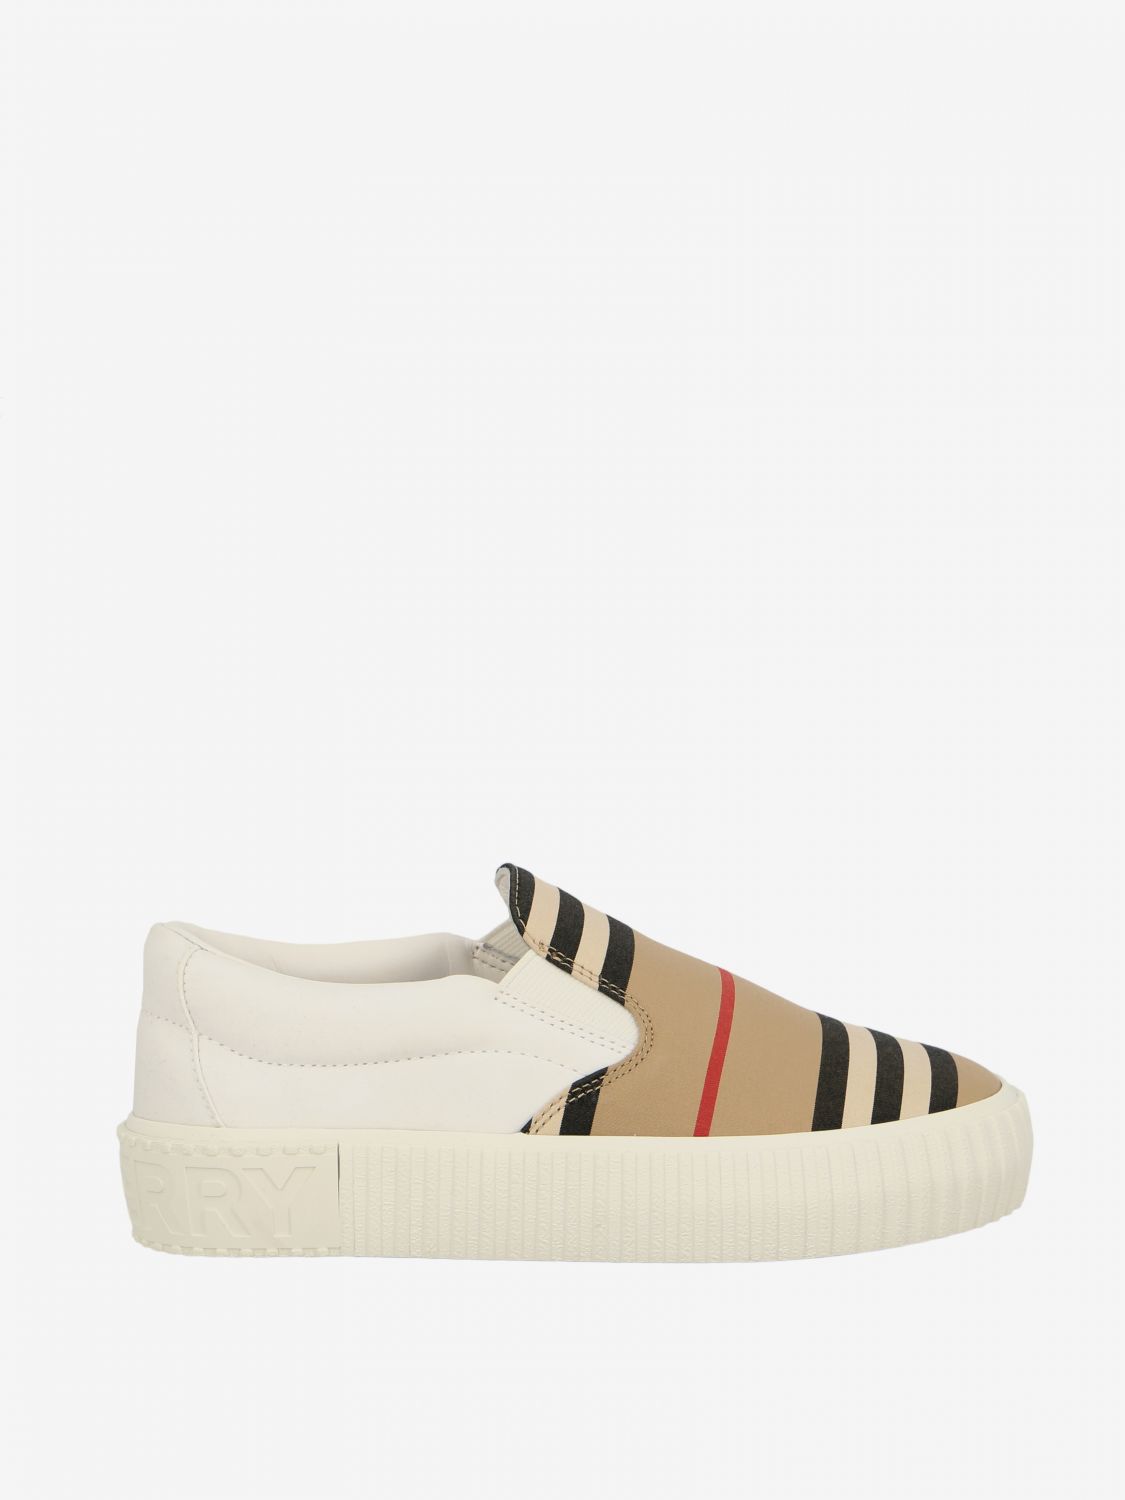 burberry shoes slip on